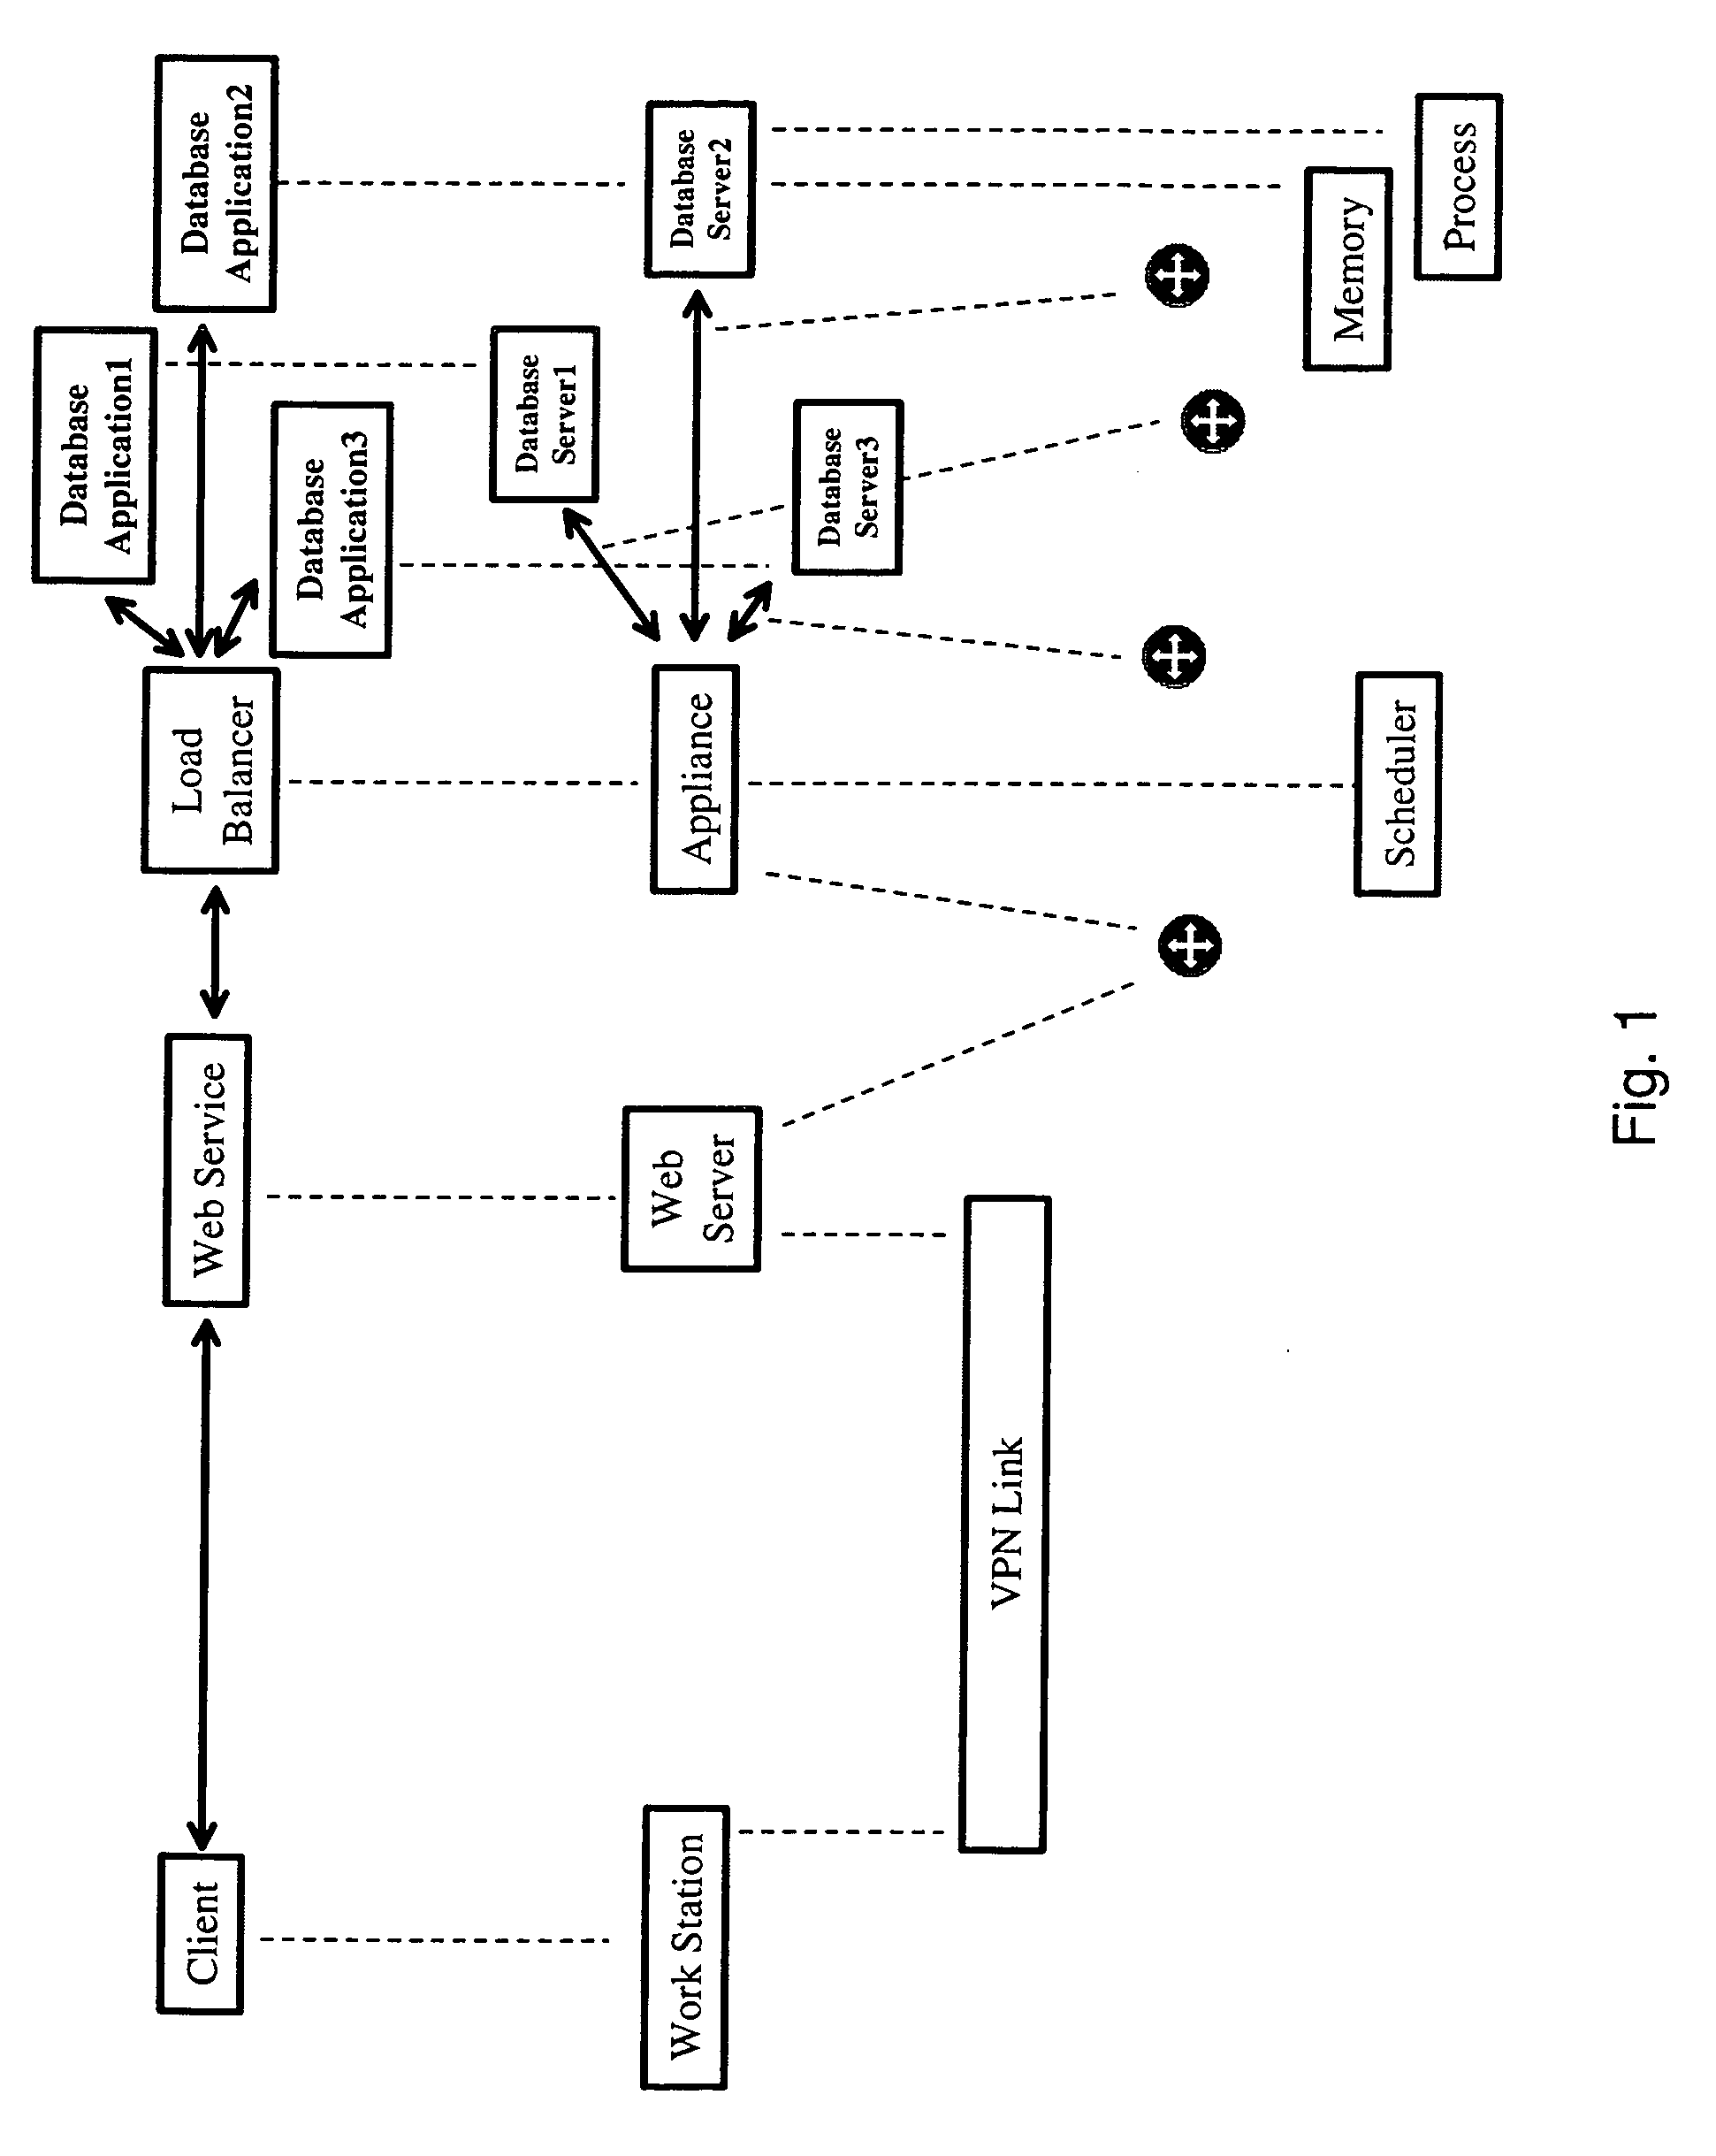 Method and apparatus for multi-realm system modeling